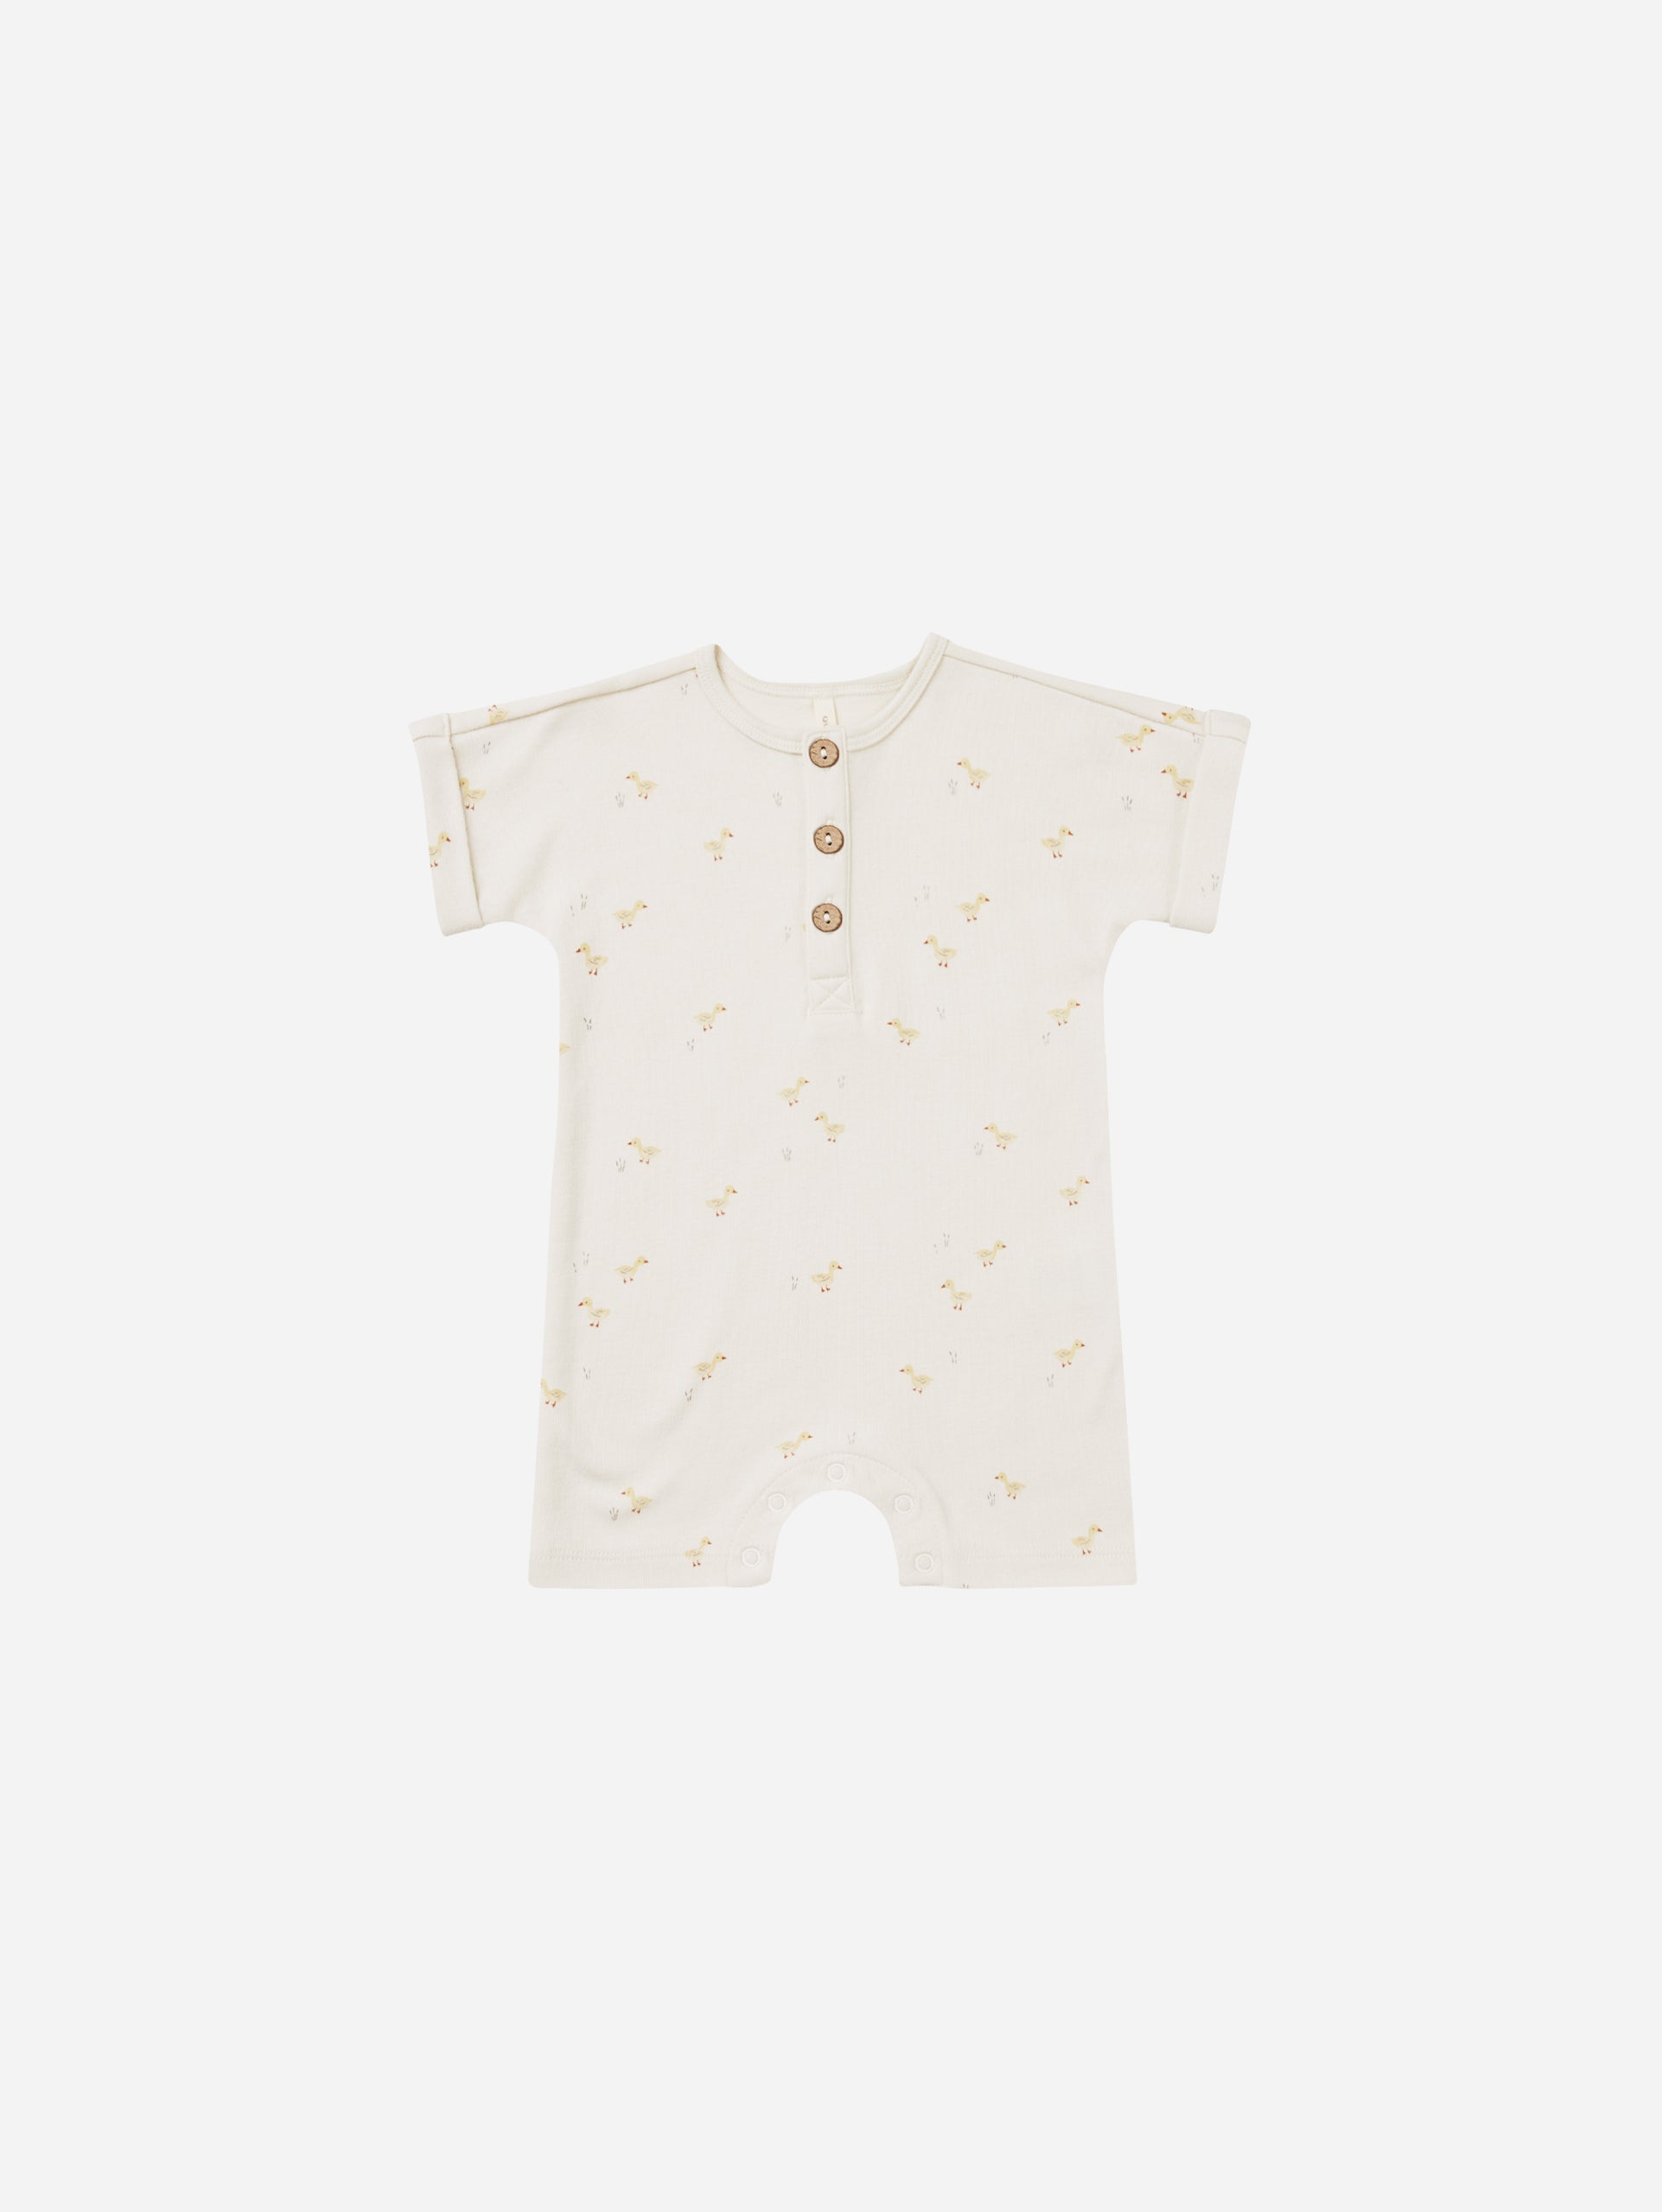 Short Sleeve One-Piece || Ducks - Rylee + Cru | Kids Clothes | Trendy Baby Clothes | Modern Infant Outfits |